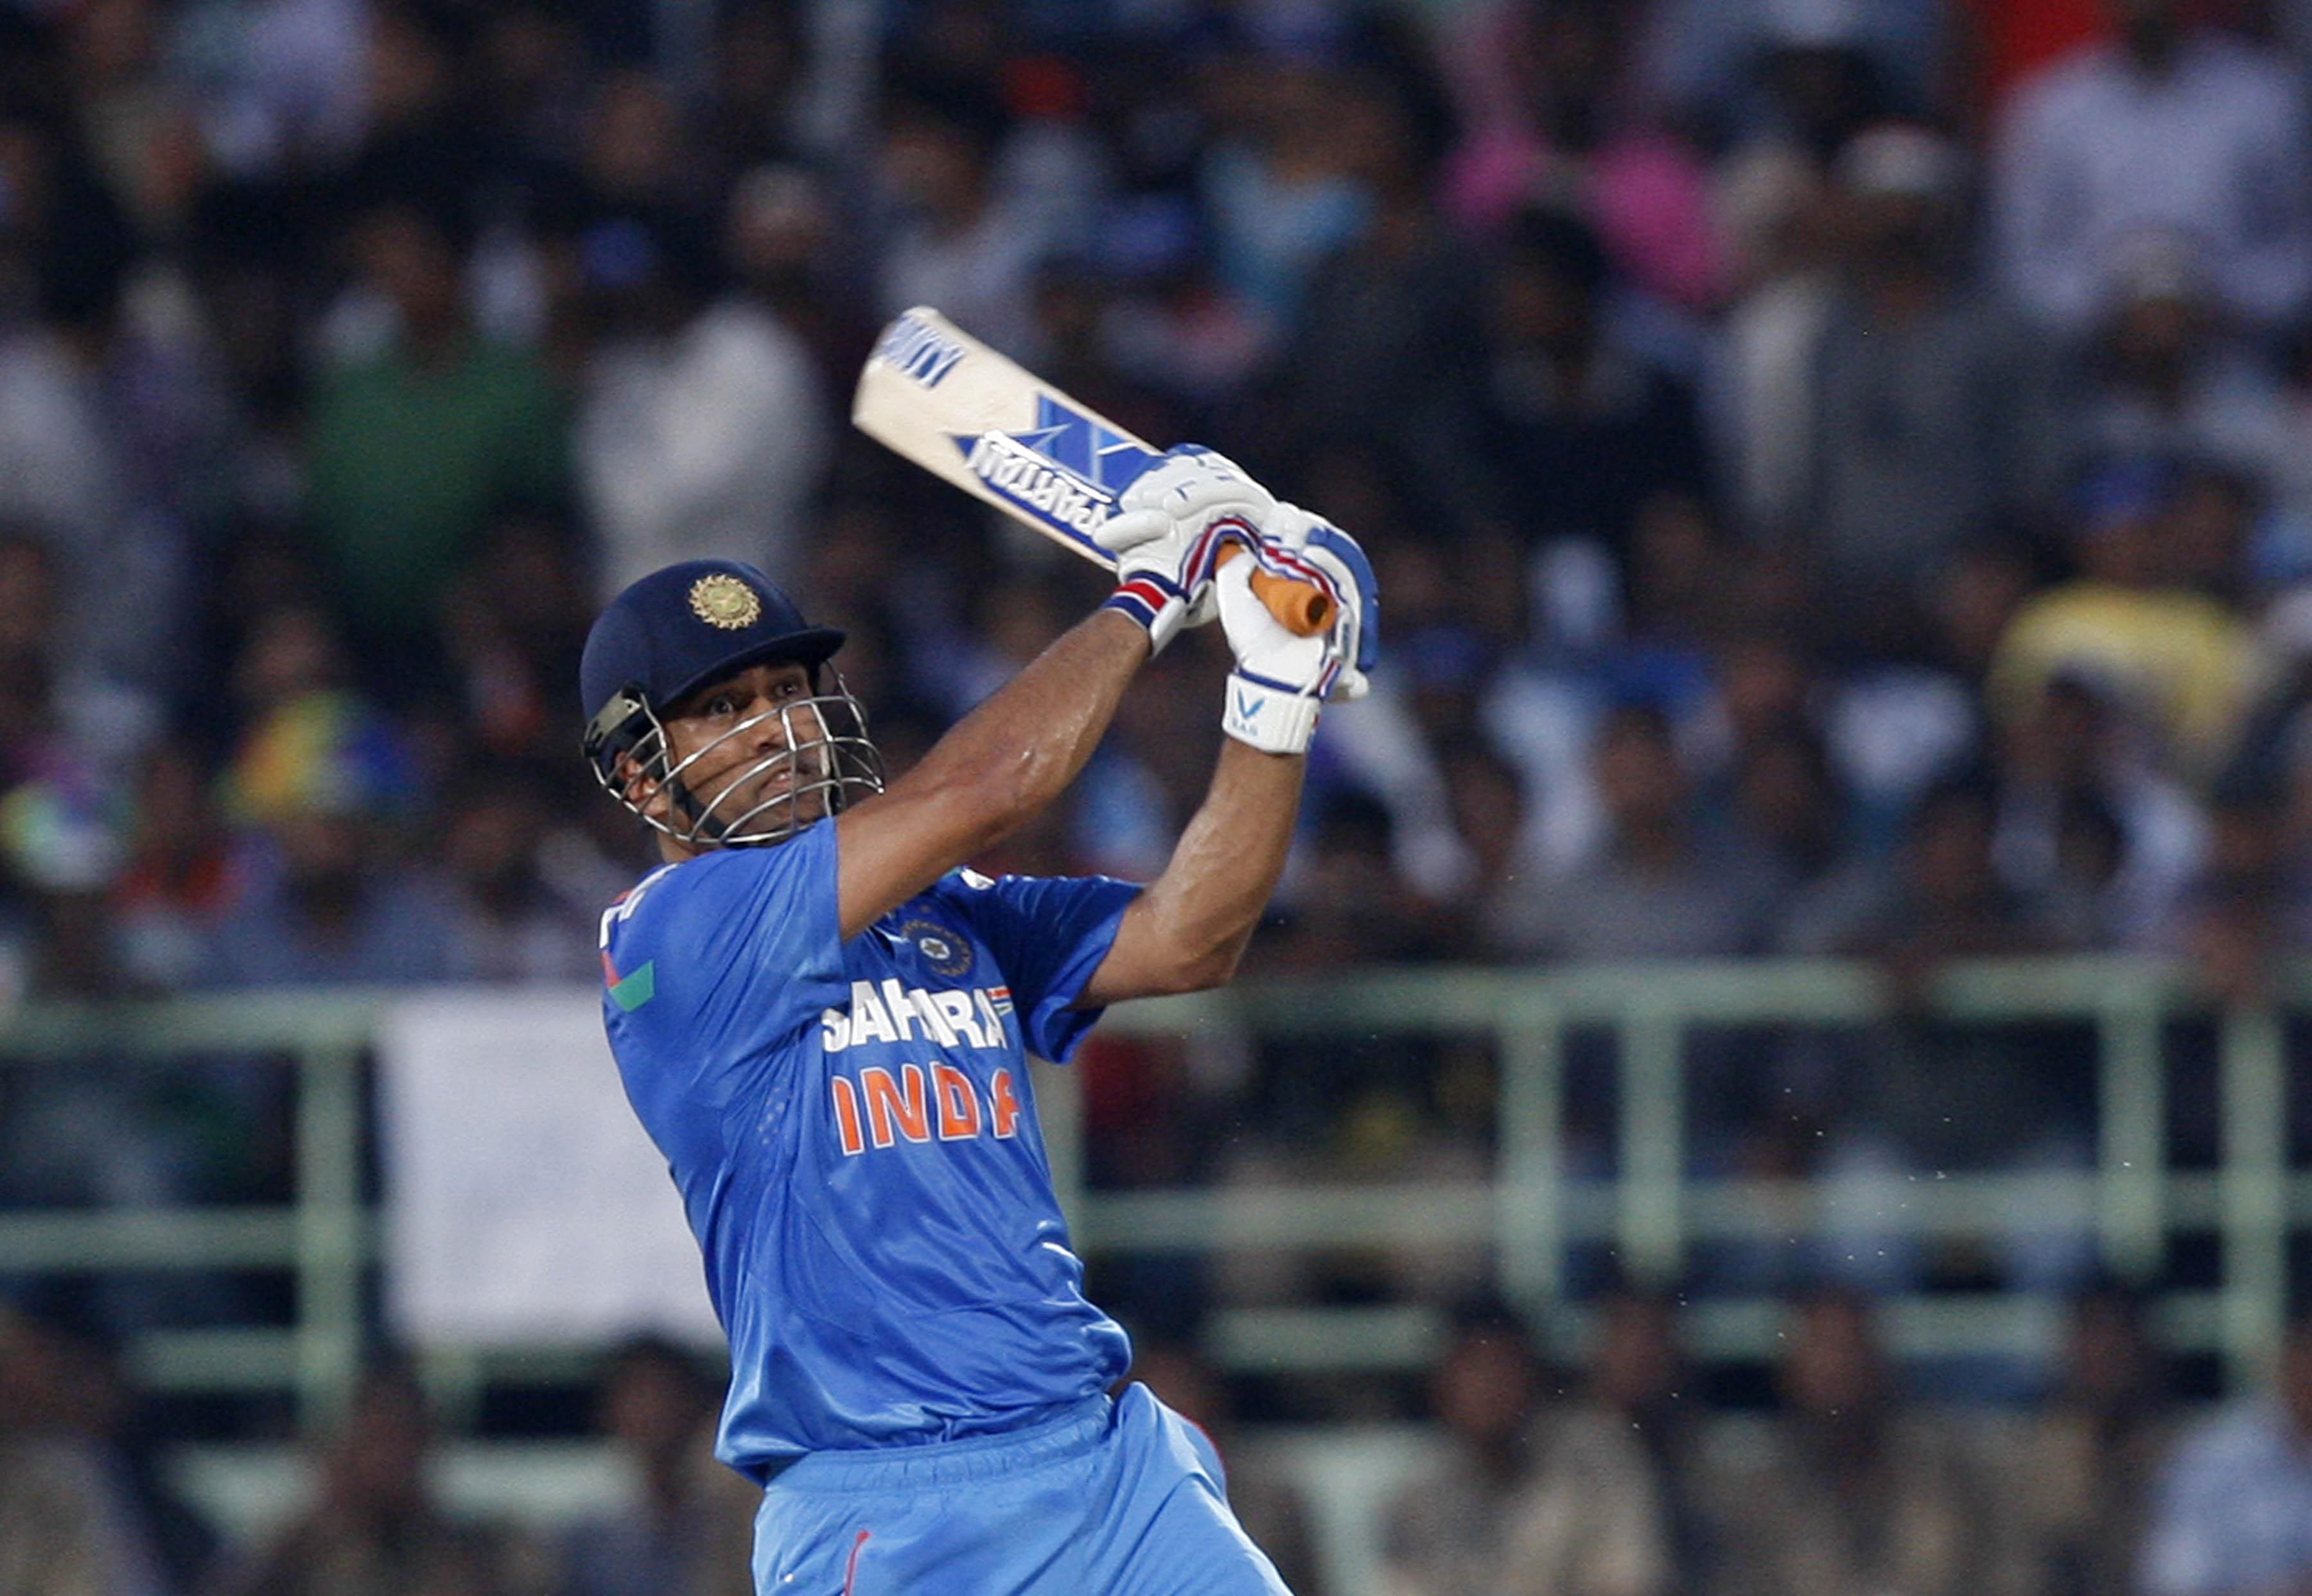 MS Dhoni strikes bat deal worth 25 crores - Cricket Country